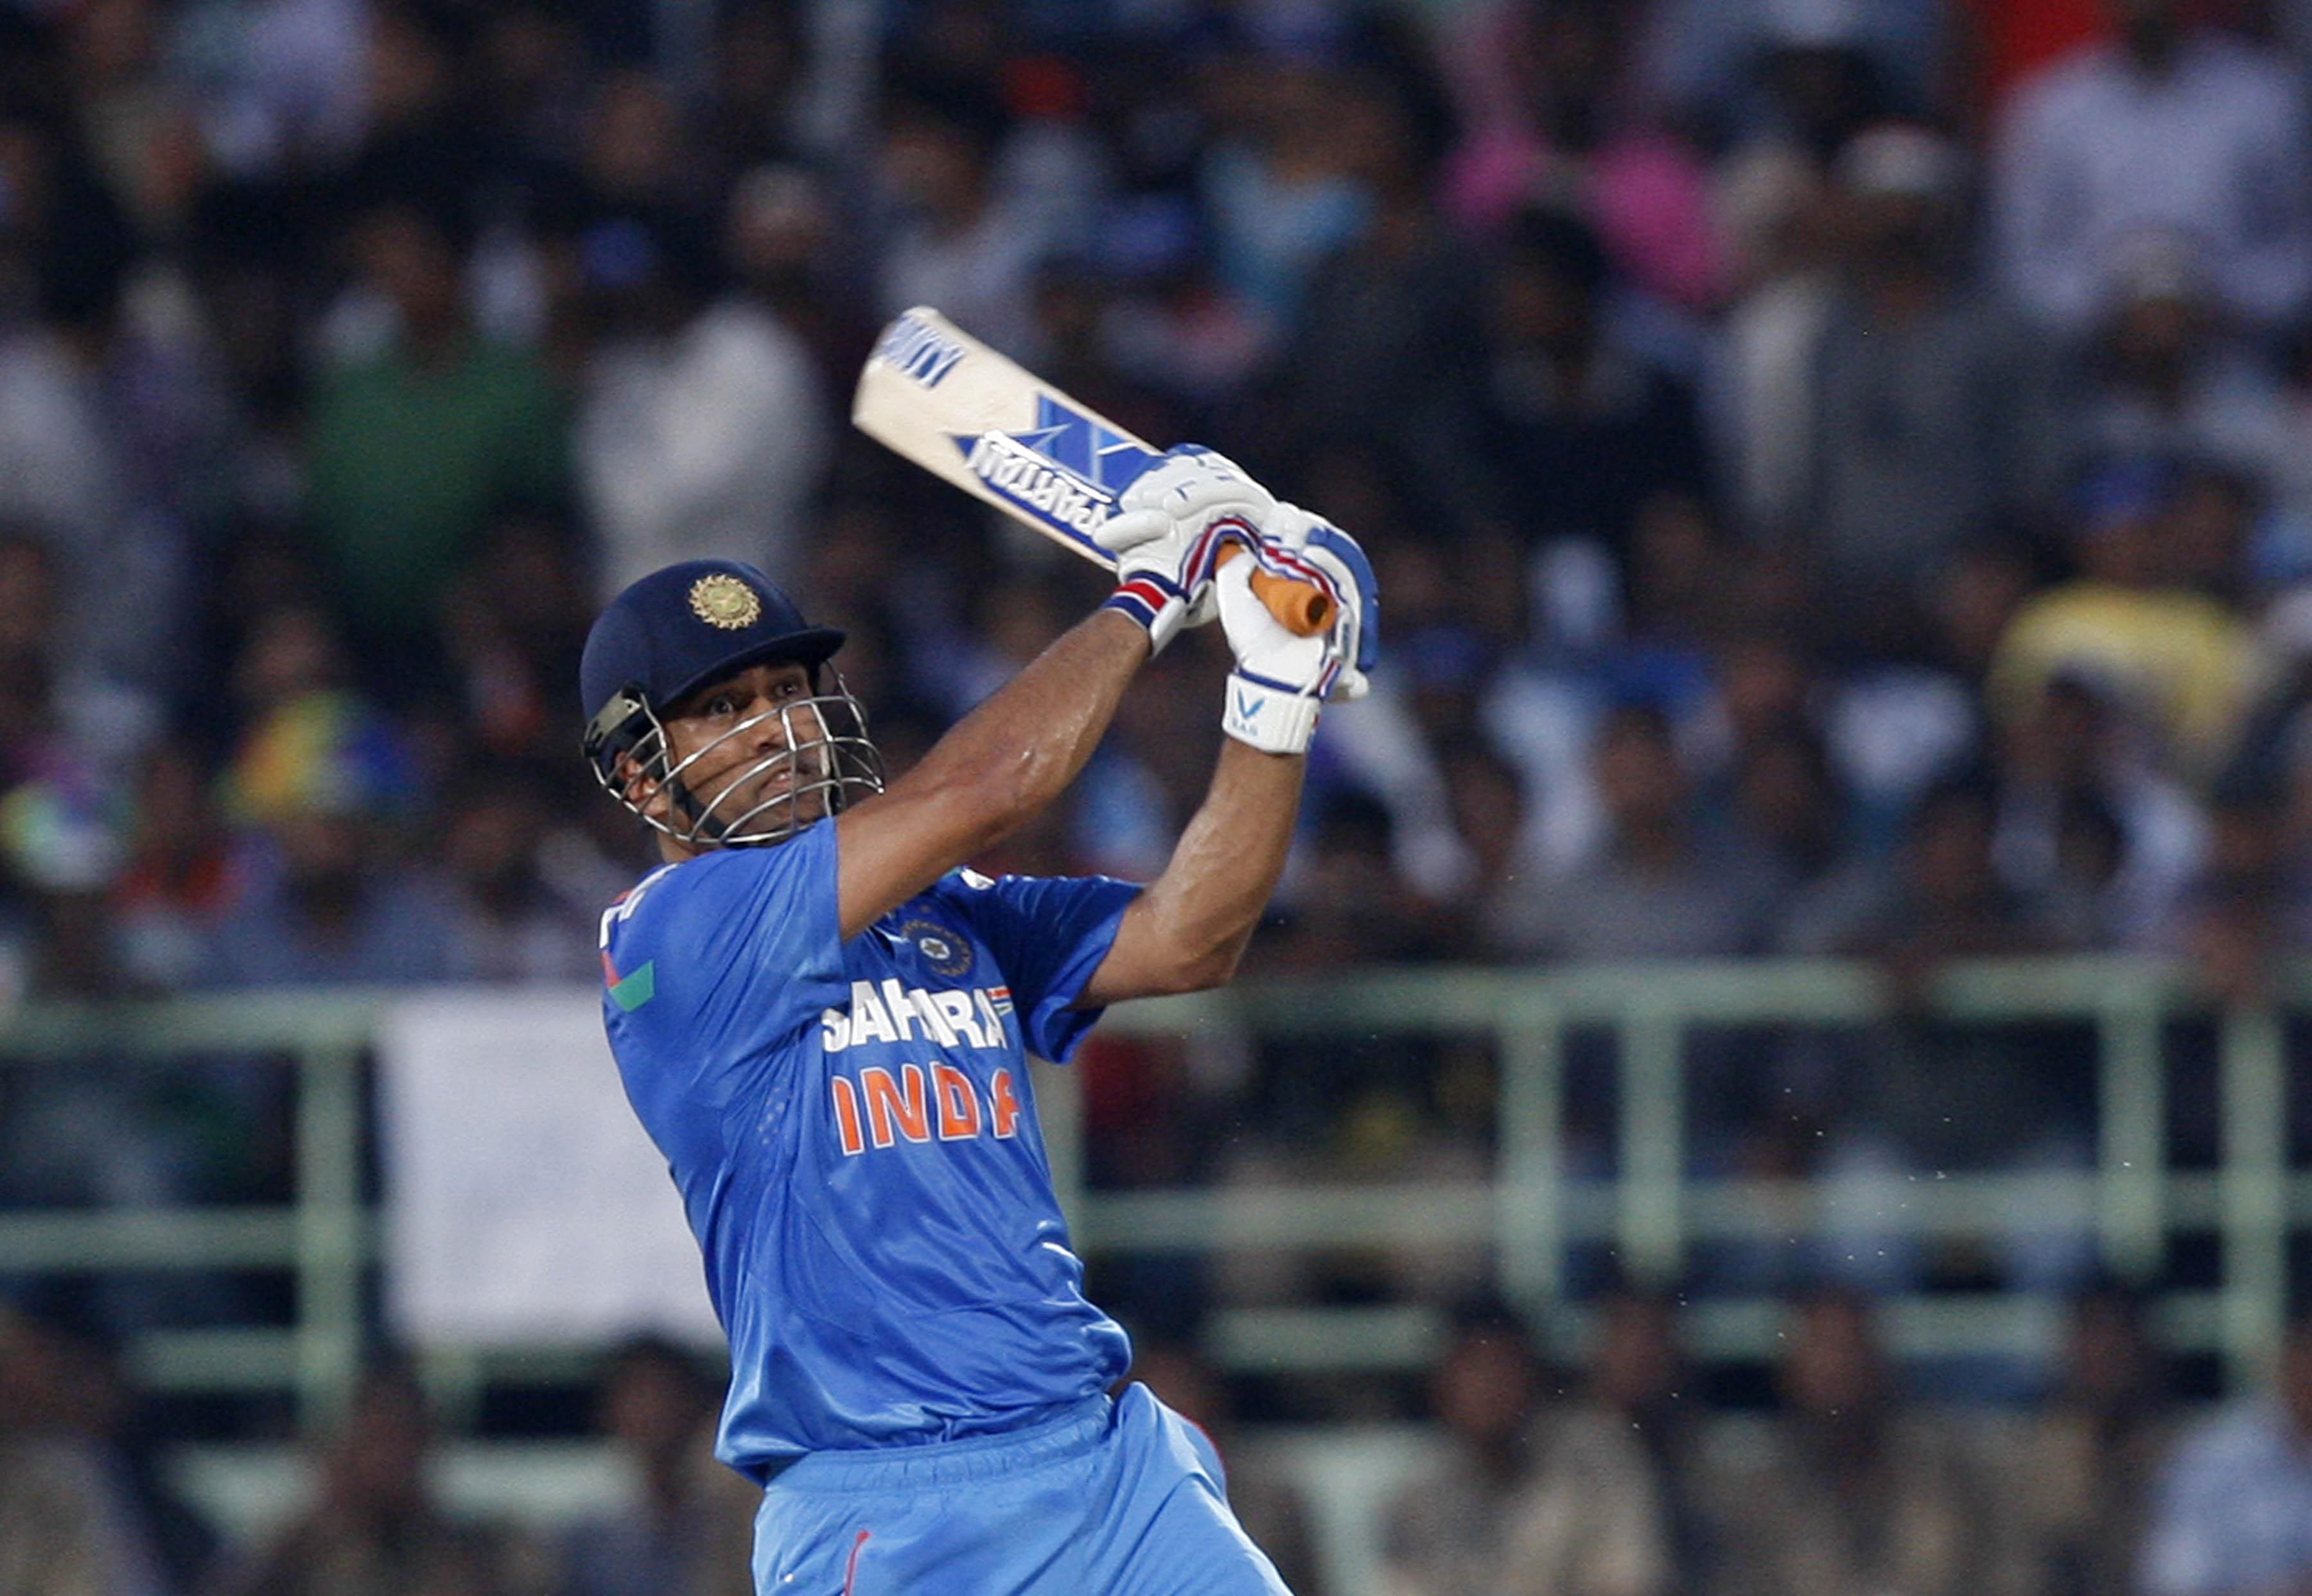 MS Dhoni strikes bat deal worth 25 crores - Cricket Country